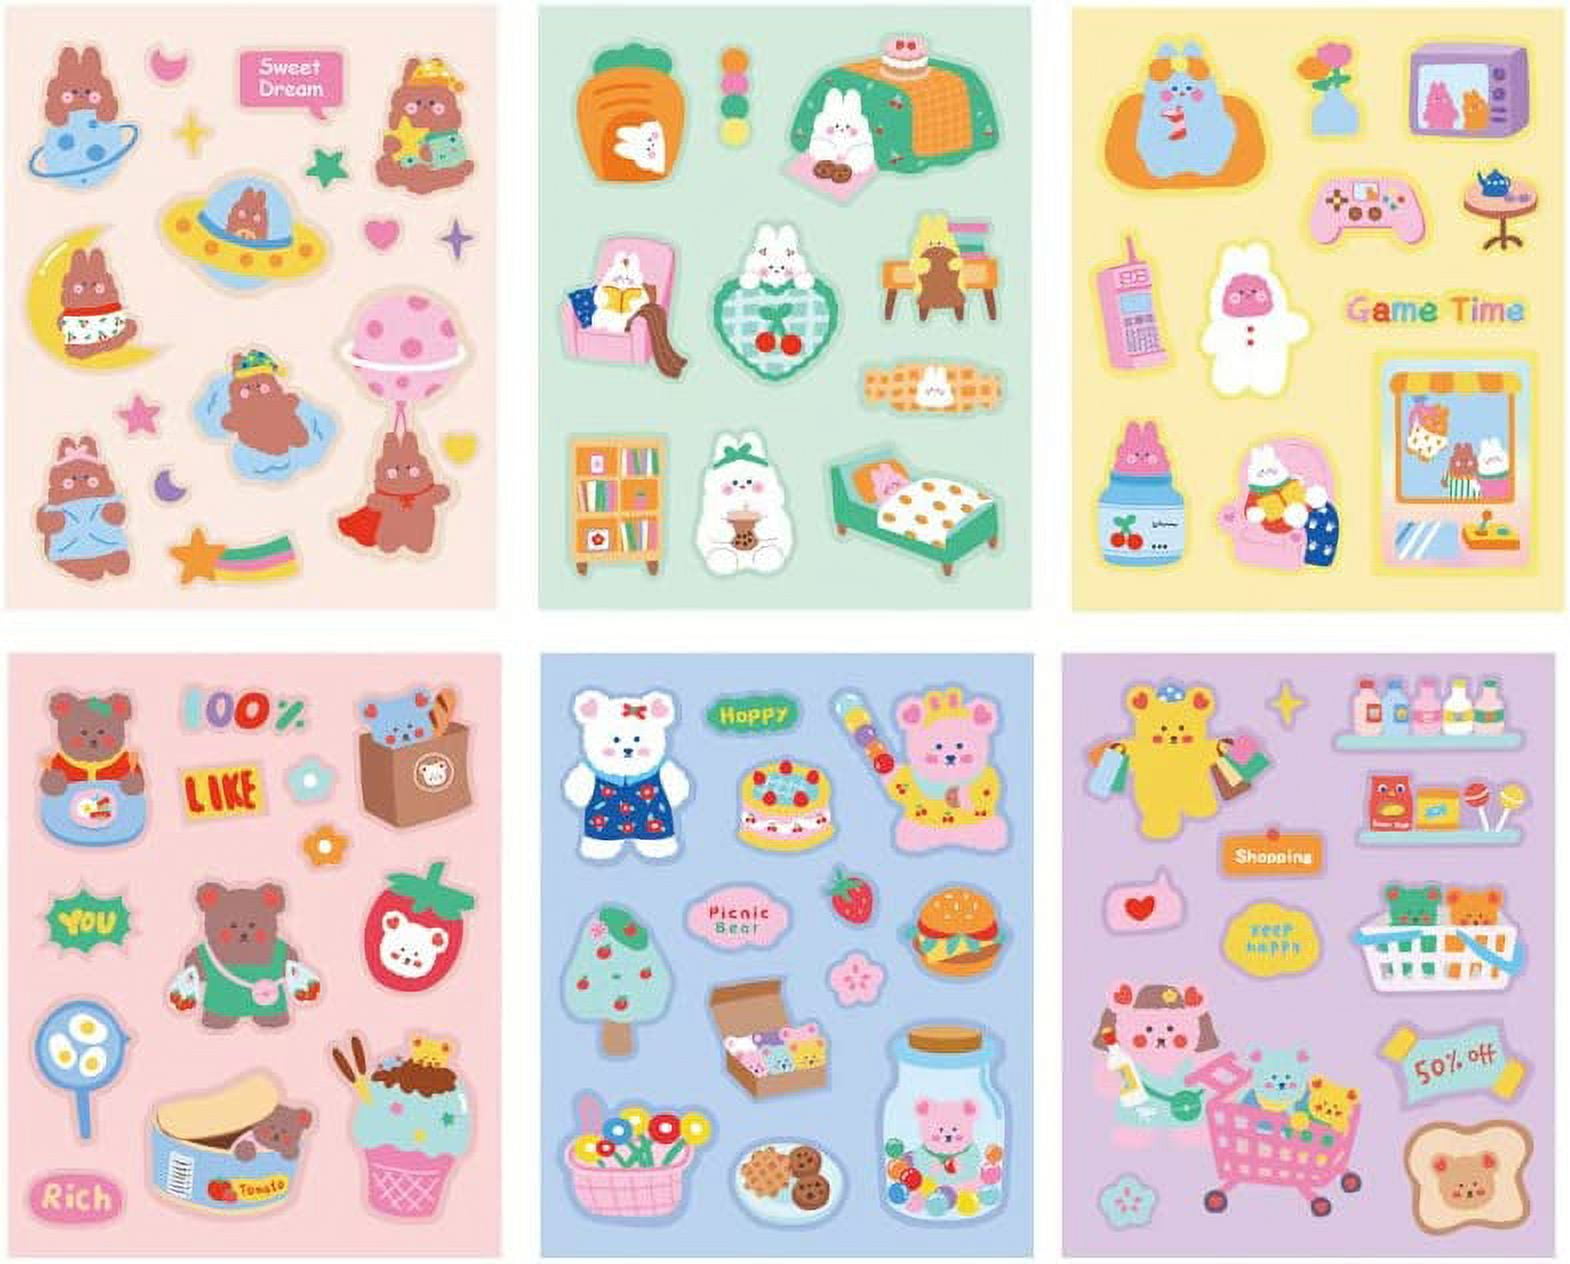 10sheets/pack Random Style Sticker, Decorative Cute Album Stickers,  Stationery DIY Material